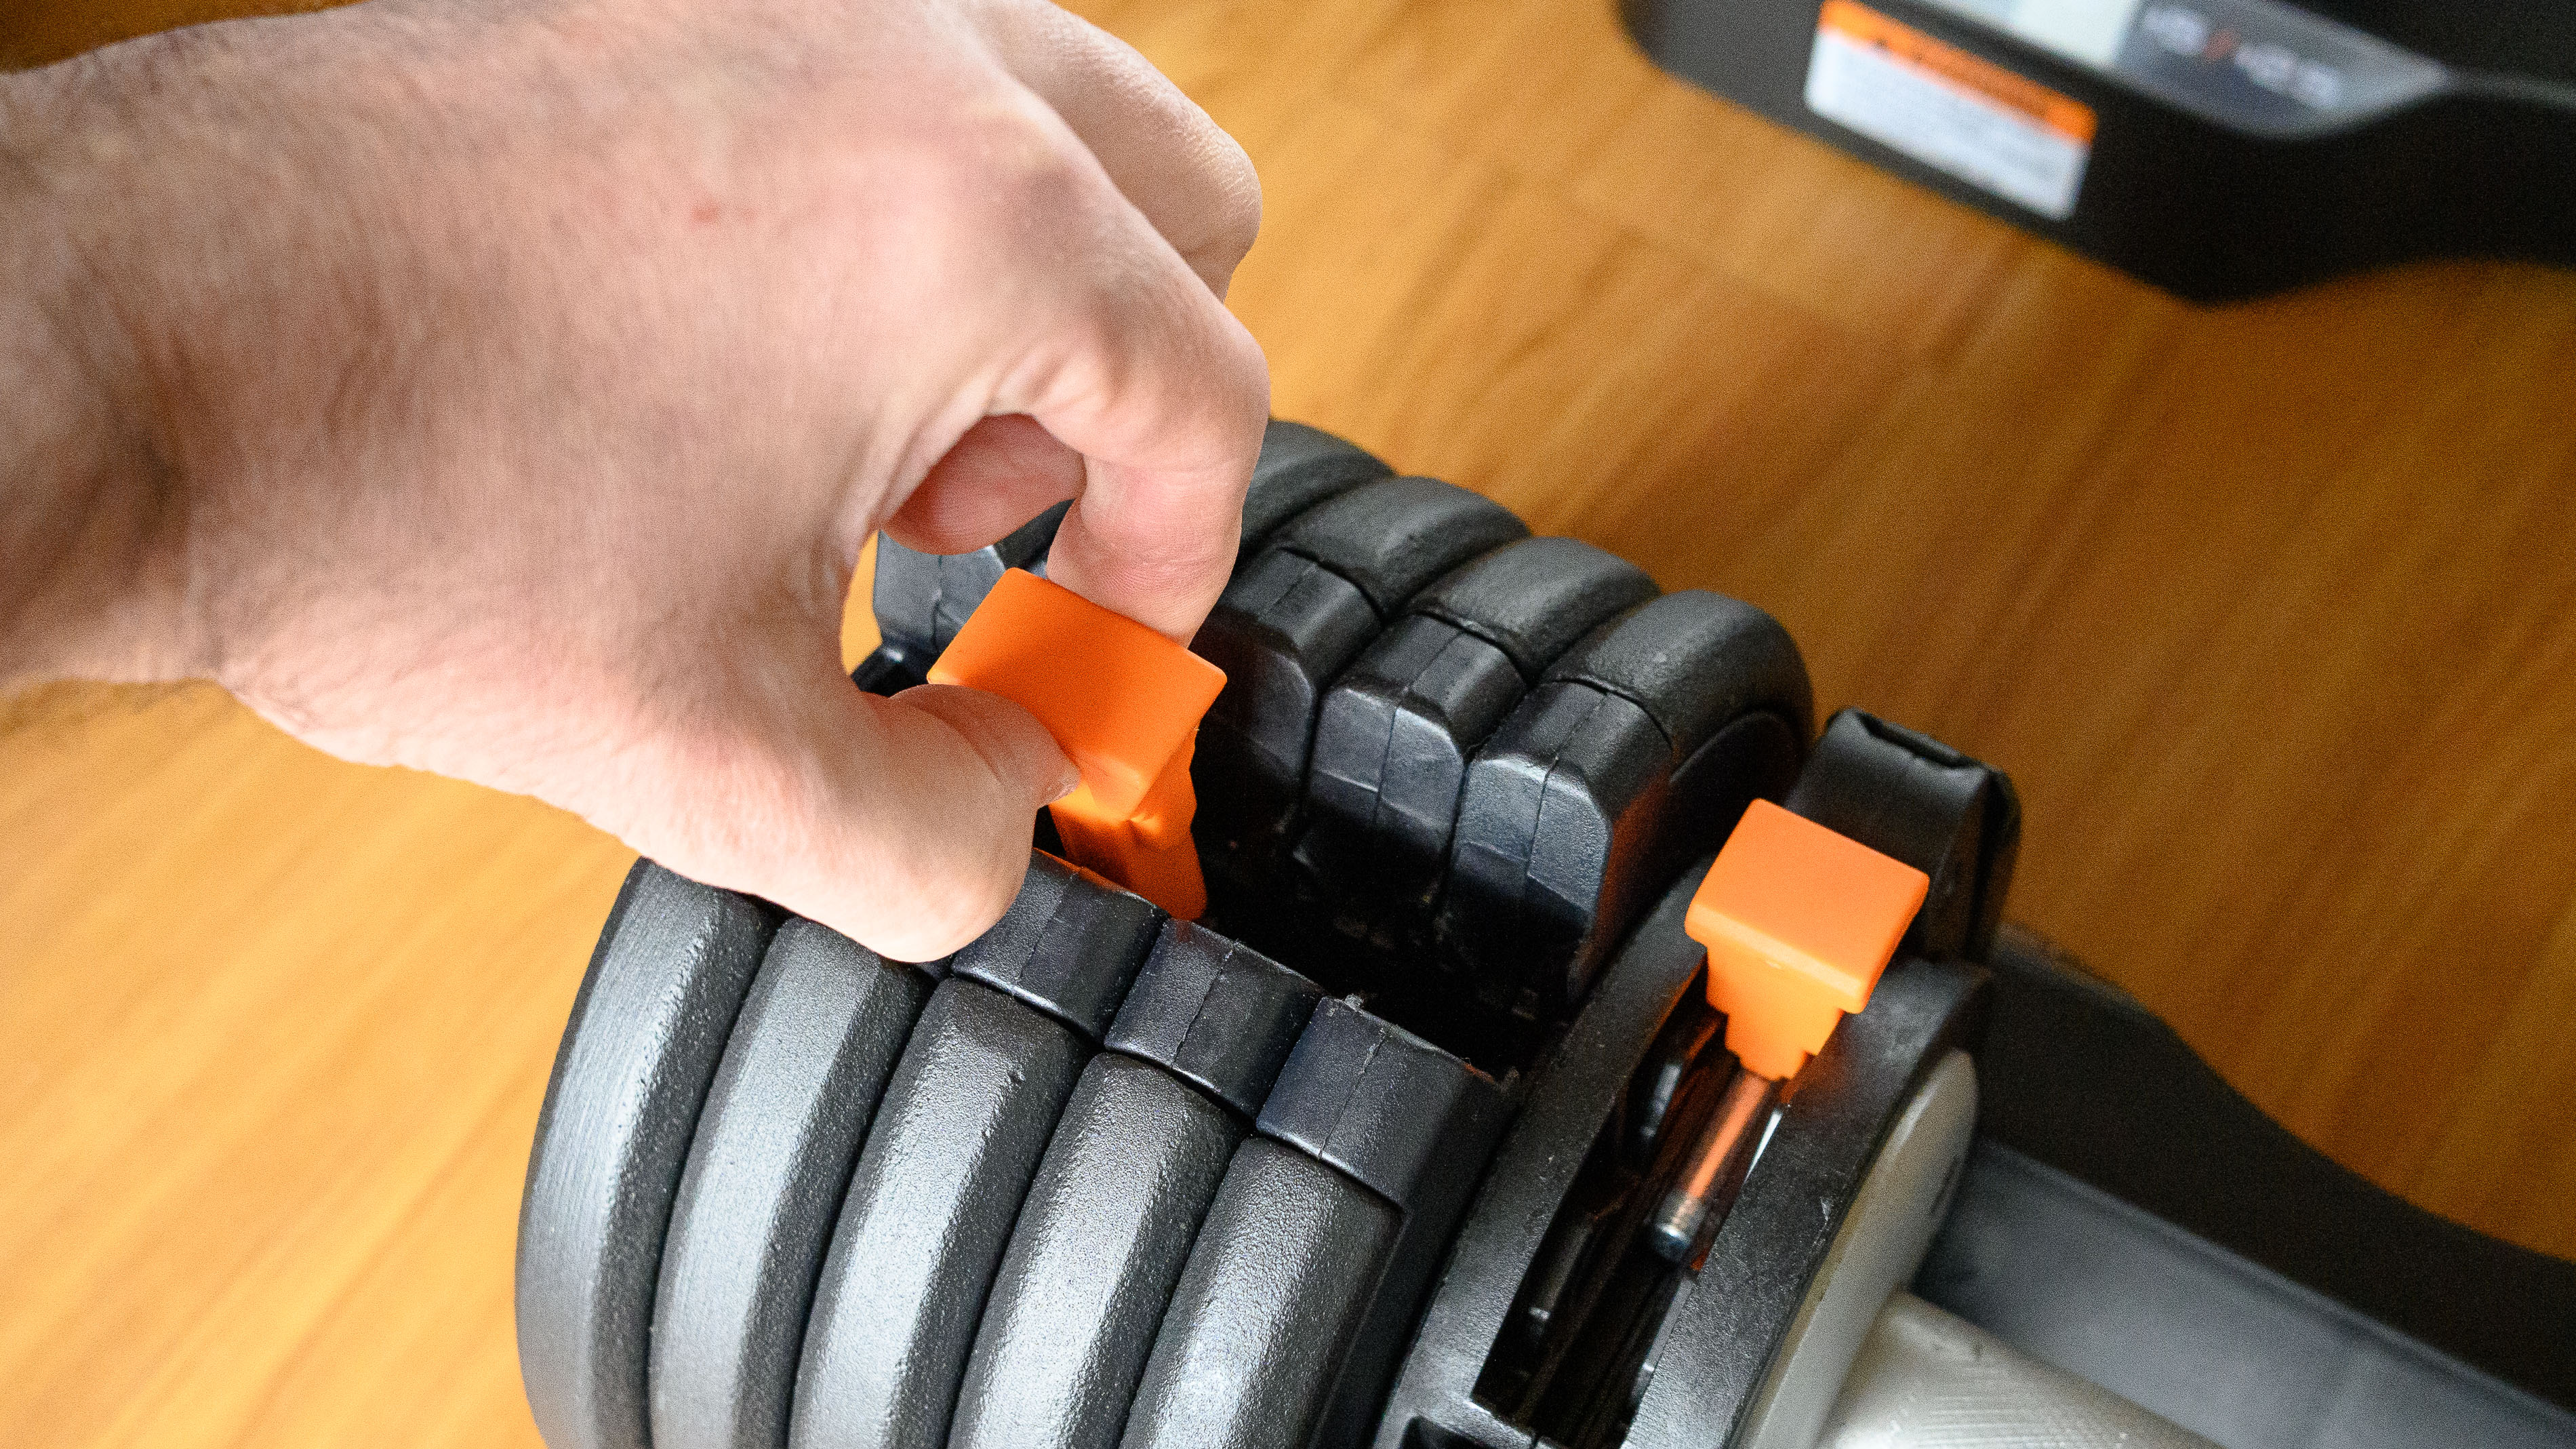 NordicTrack Select-a-Weight Adjustable Dumbbells.